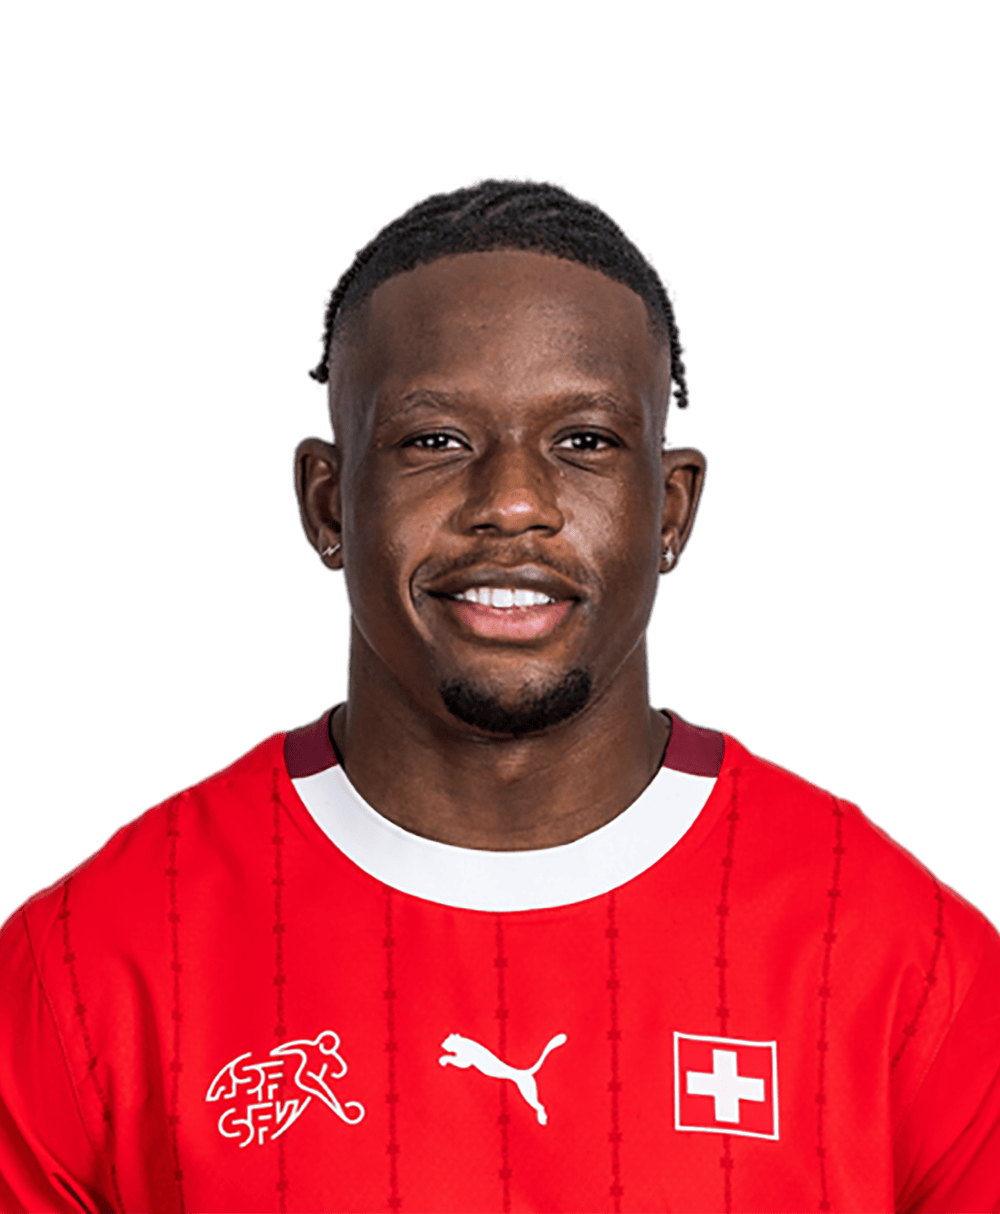 Denis Zakaria named to Switzerland squad for 2022 World Cup - We